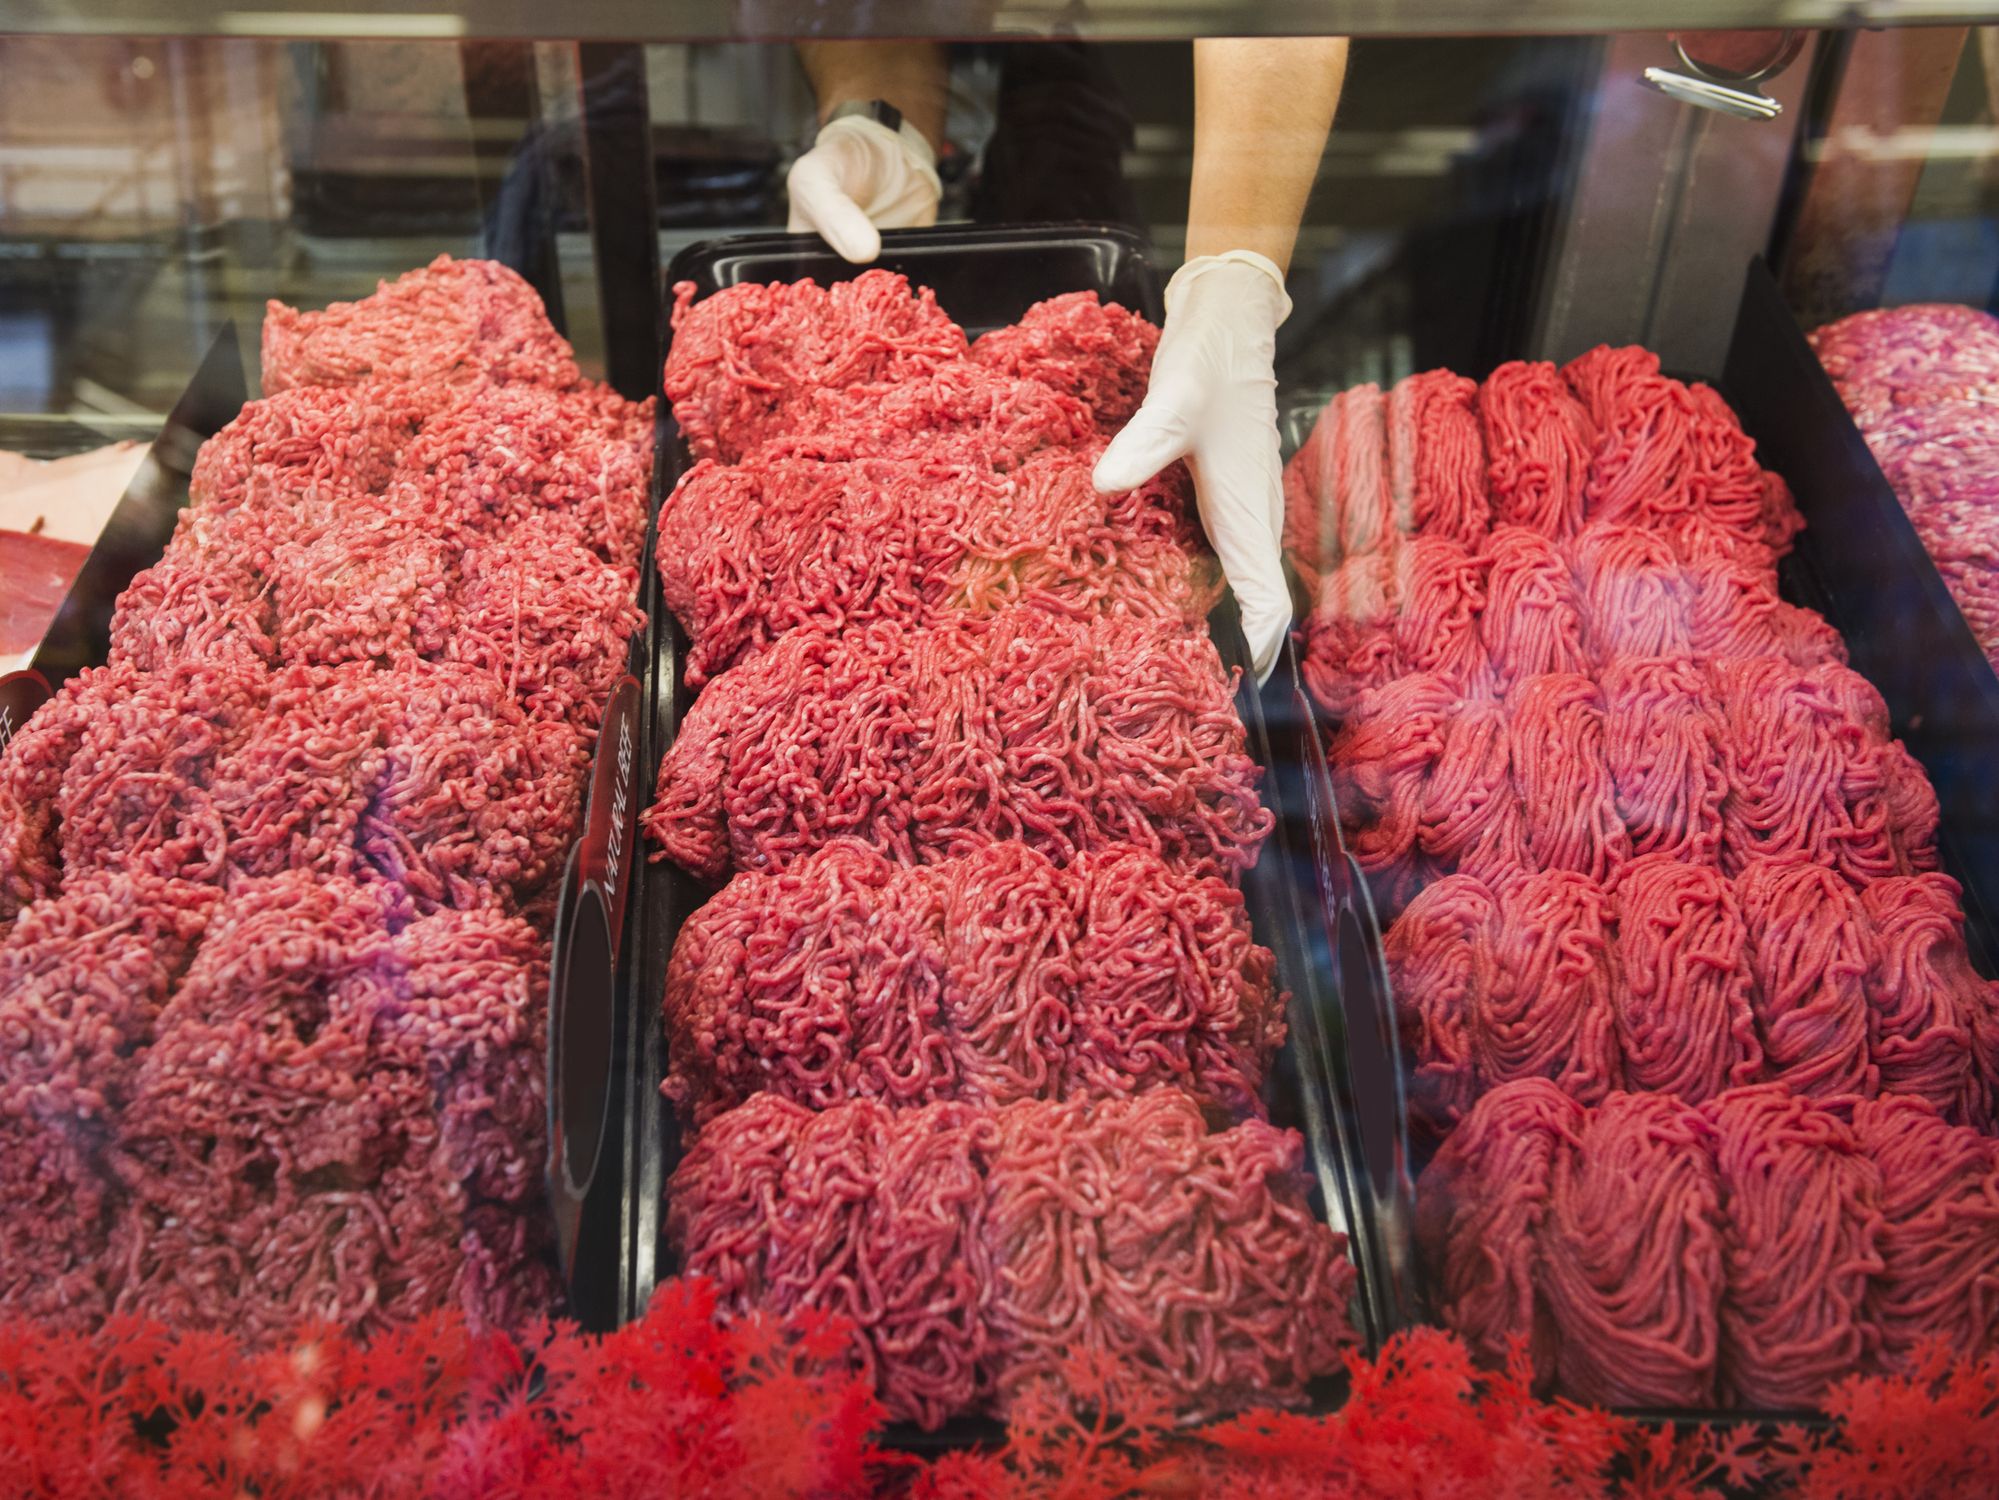 Everything You Need to Know About Ground Beef